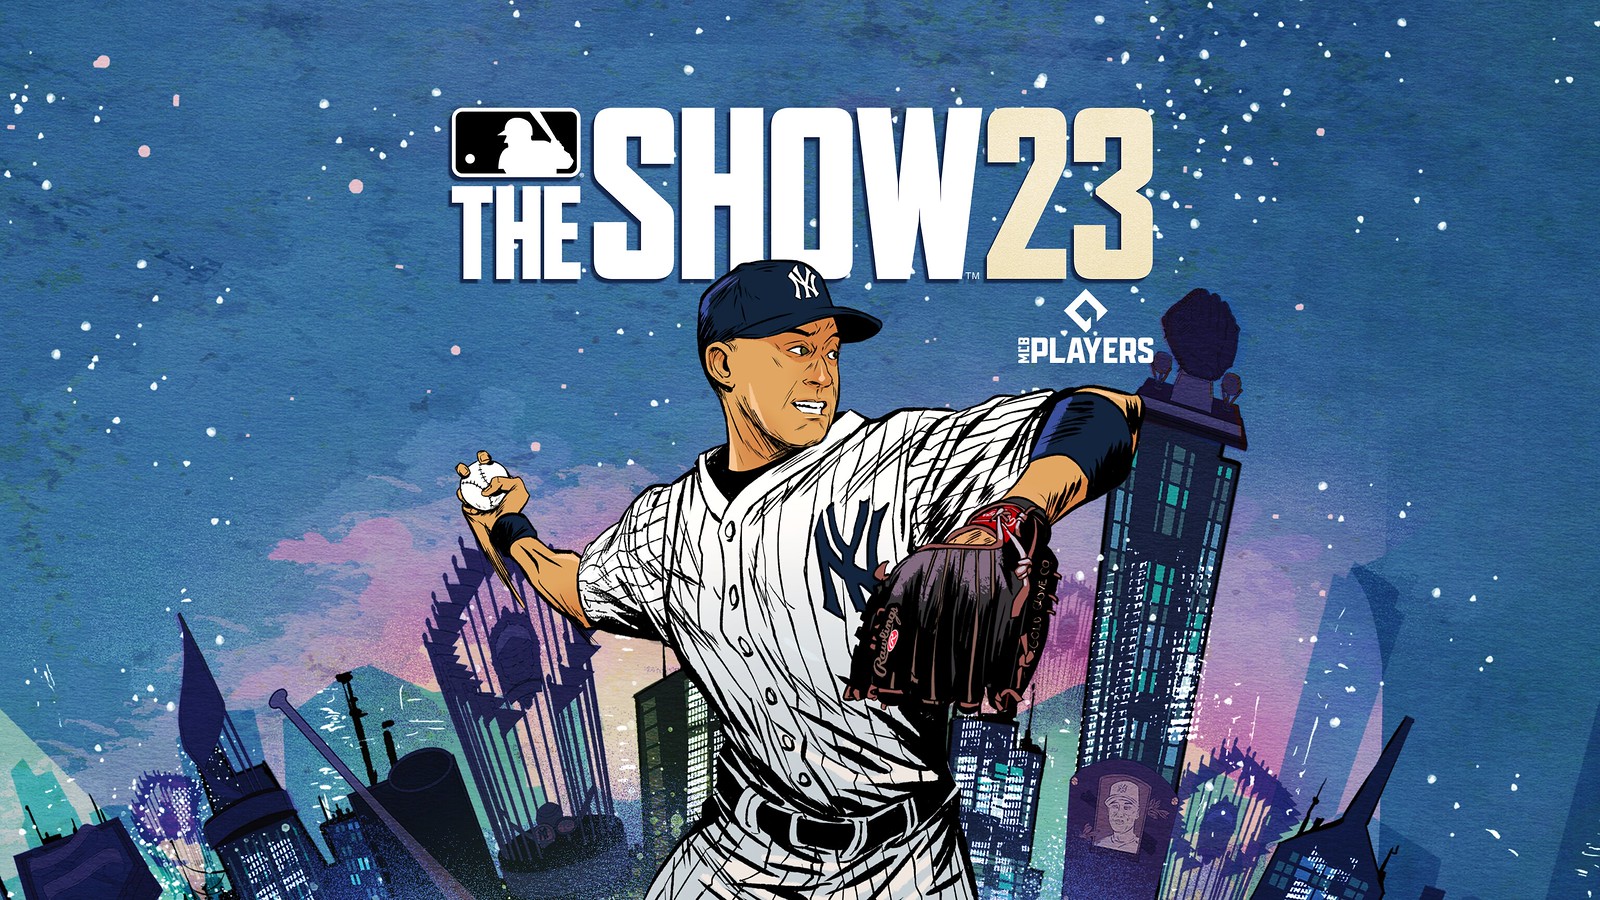 MLB 15: The Show Images - LaunchBox Games Database